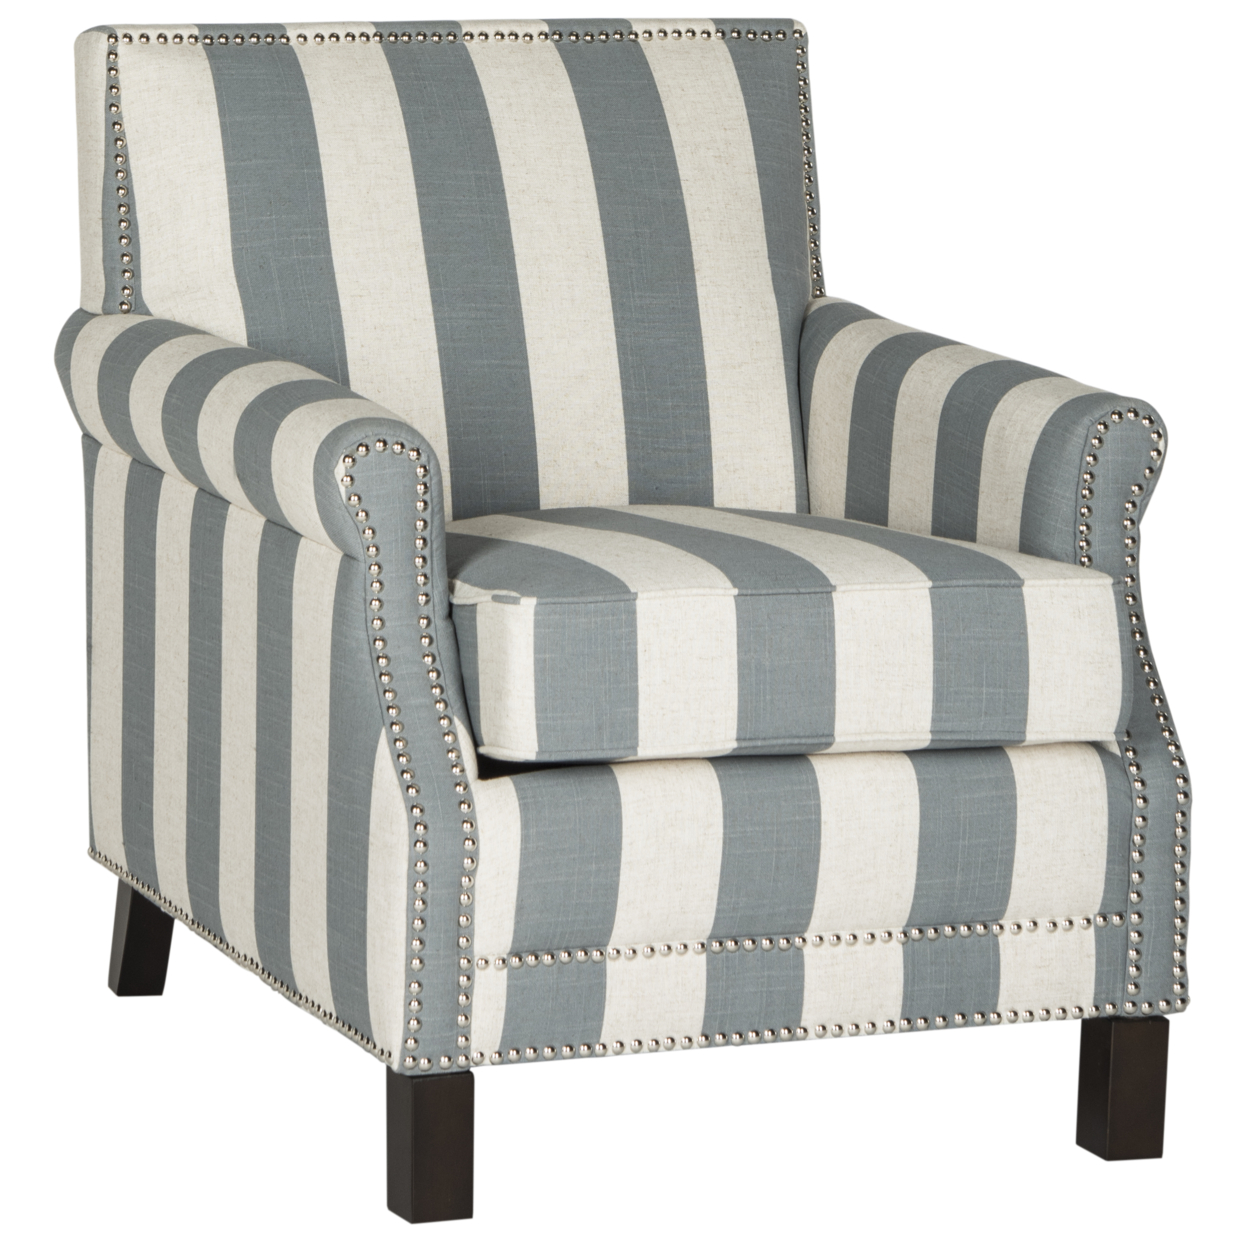 SAFAVIEH Easton Rustic Glam Upholstered Club Chair w/ Nailheads, Grey/White - image 2 of 5